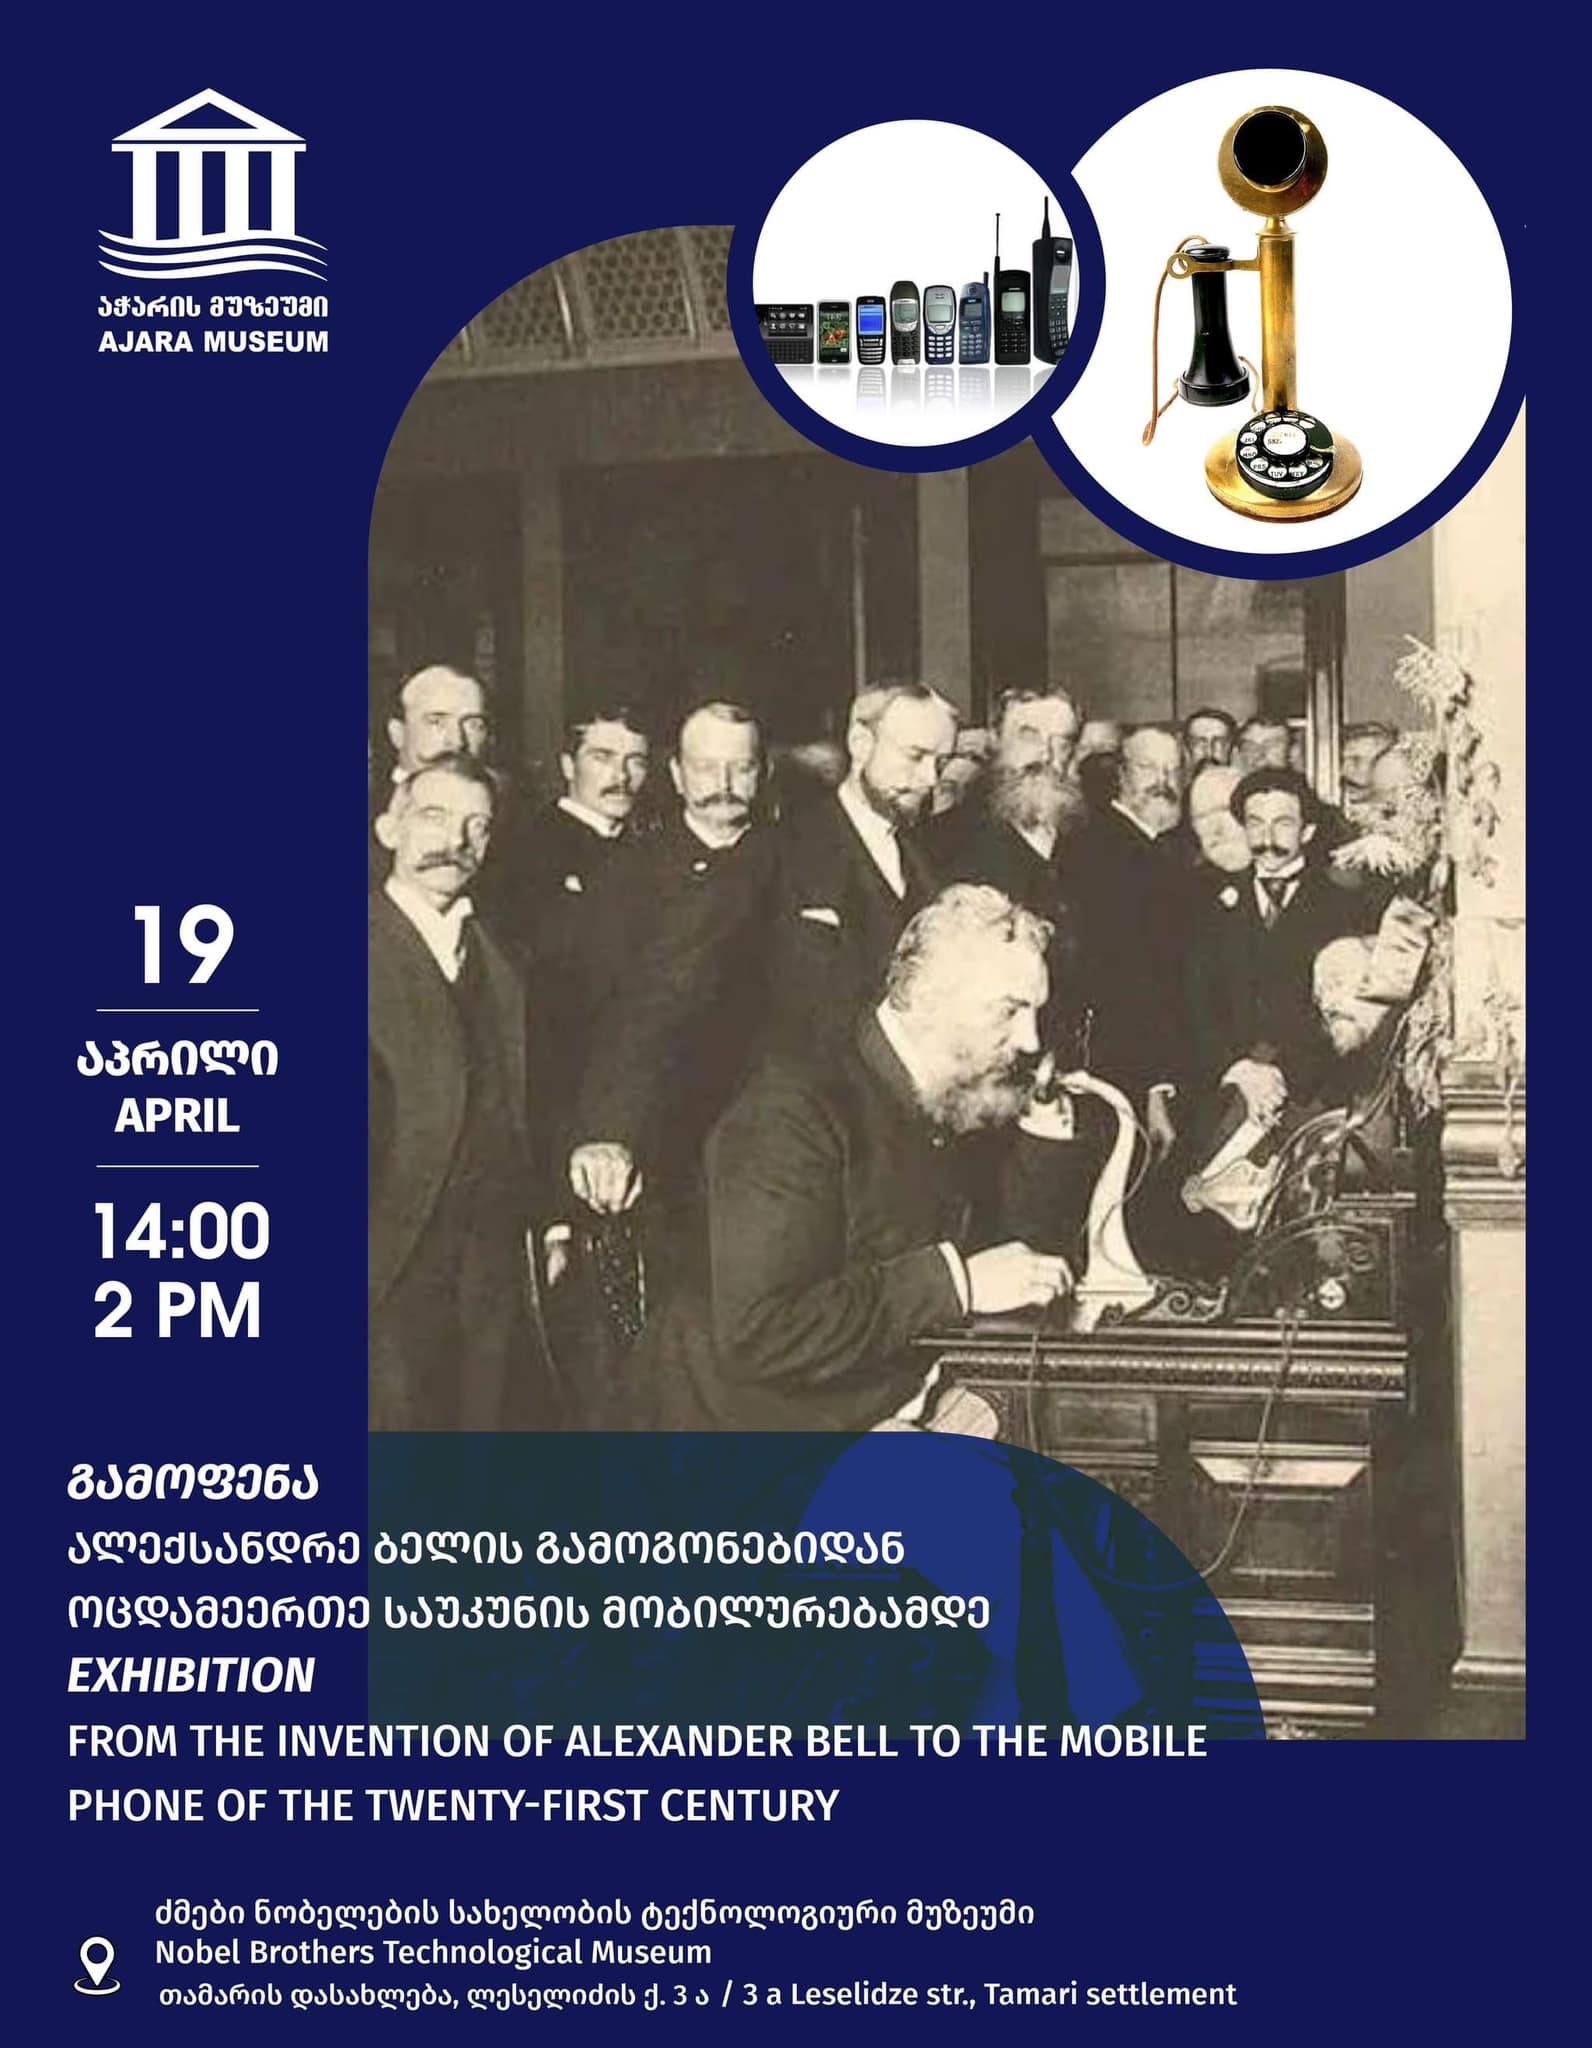 Exhibition - From the invention of Alexander Bell to the mobile phone of the twenty-first